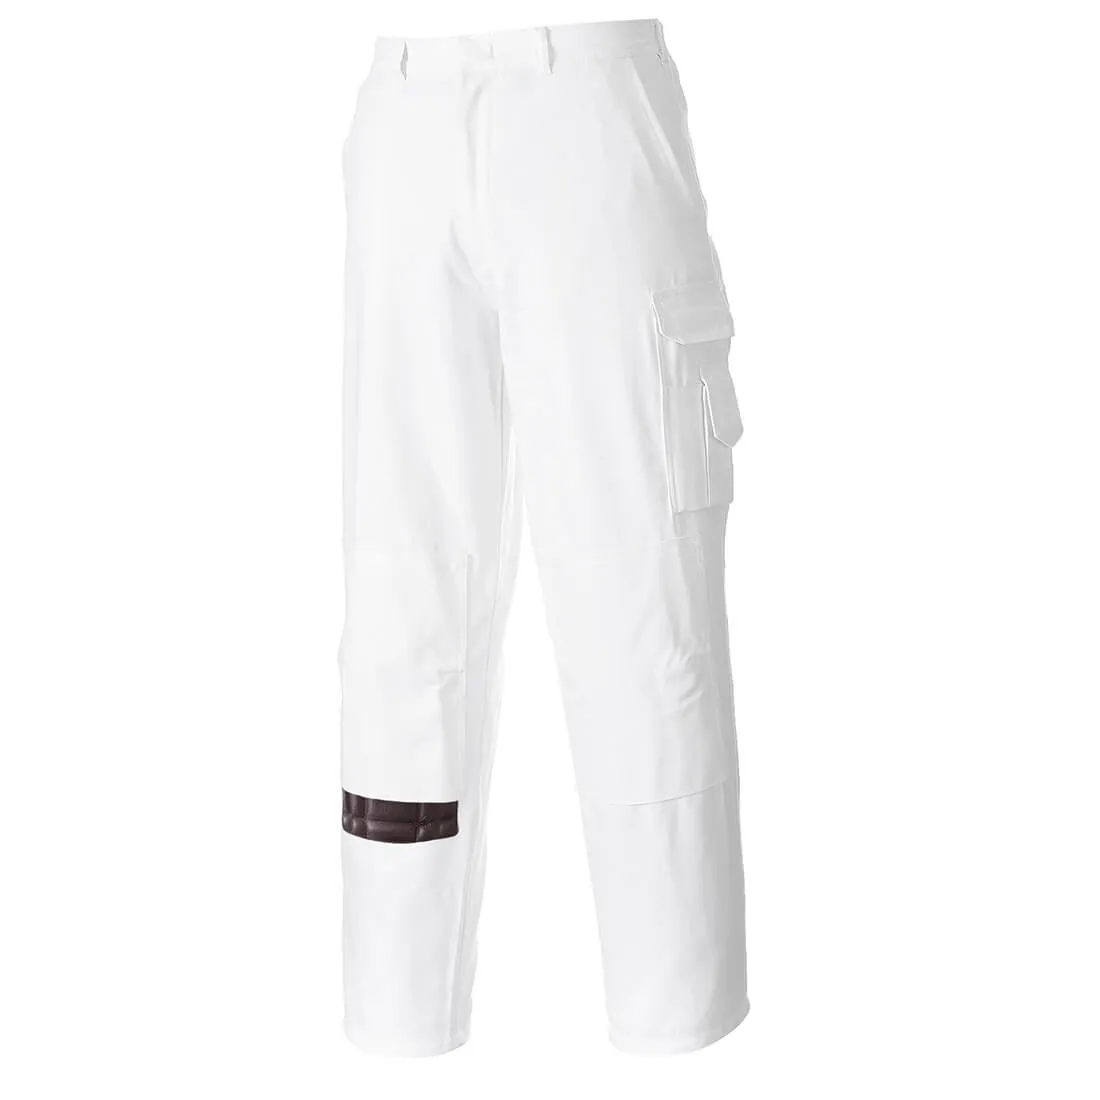 Portwest Painters Trousers - White, Extra Small, 33"